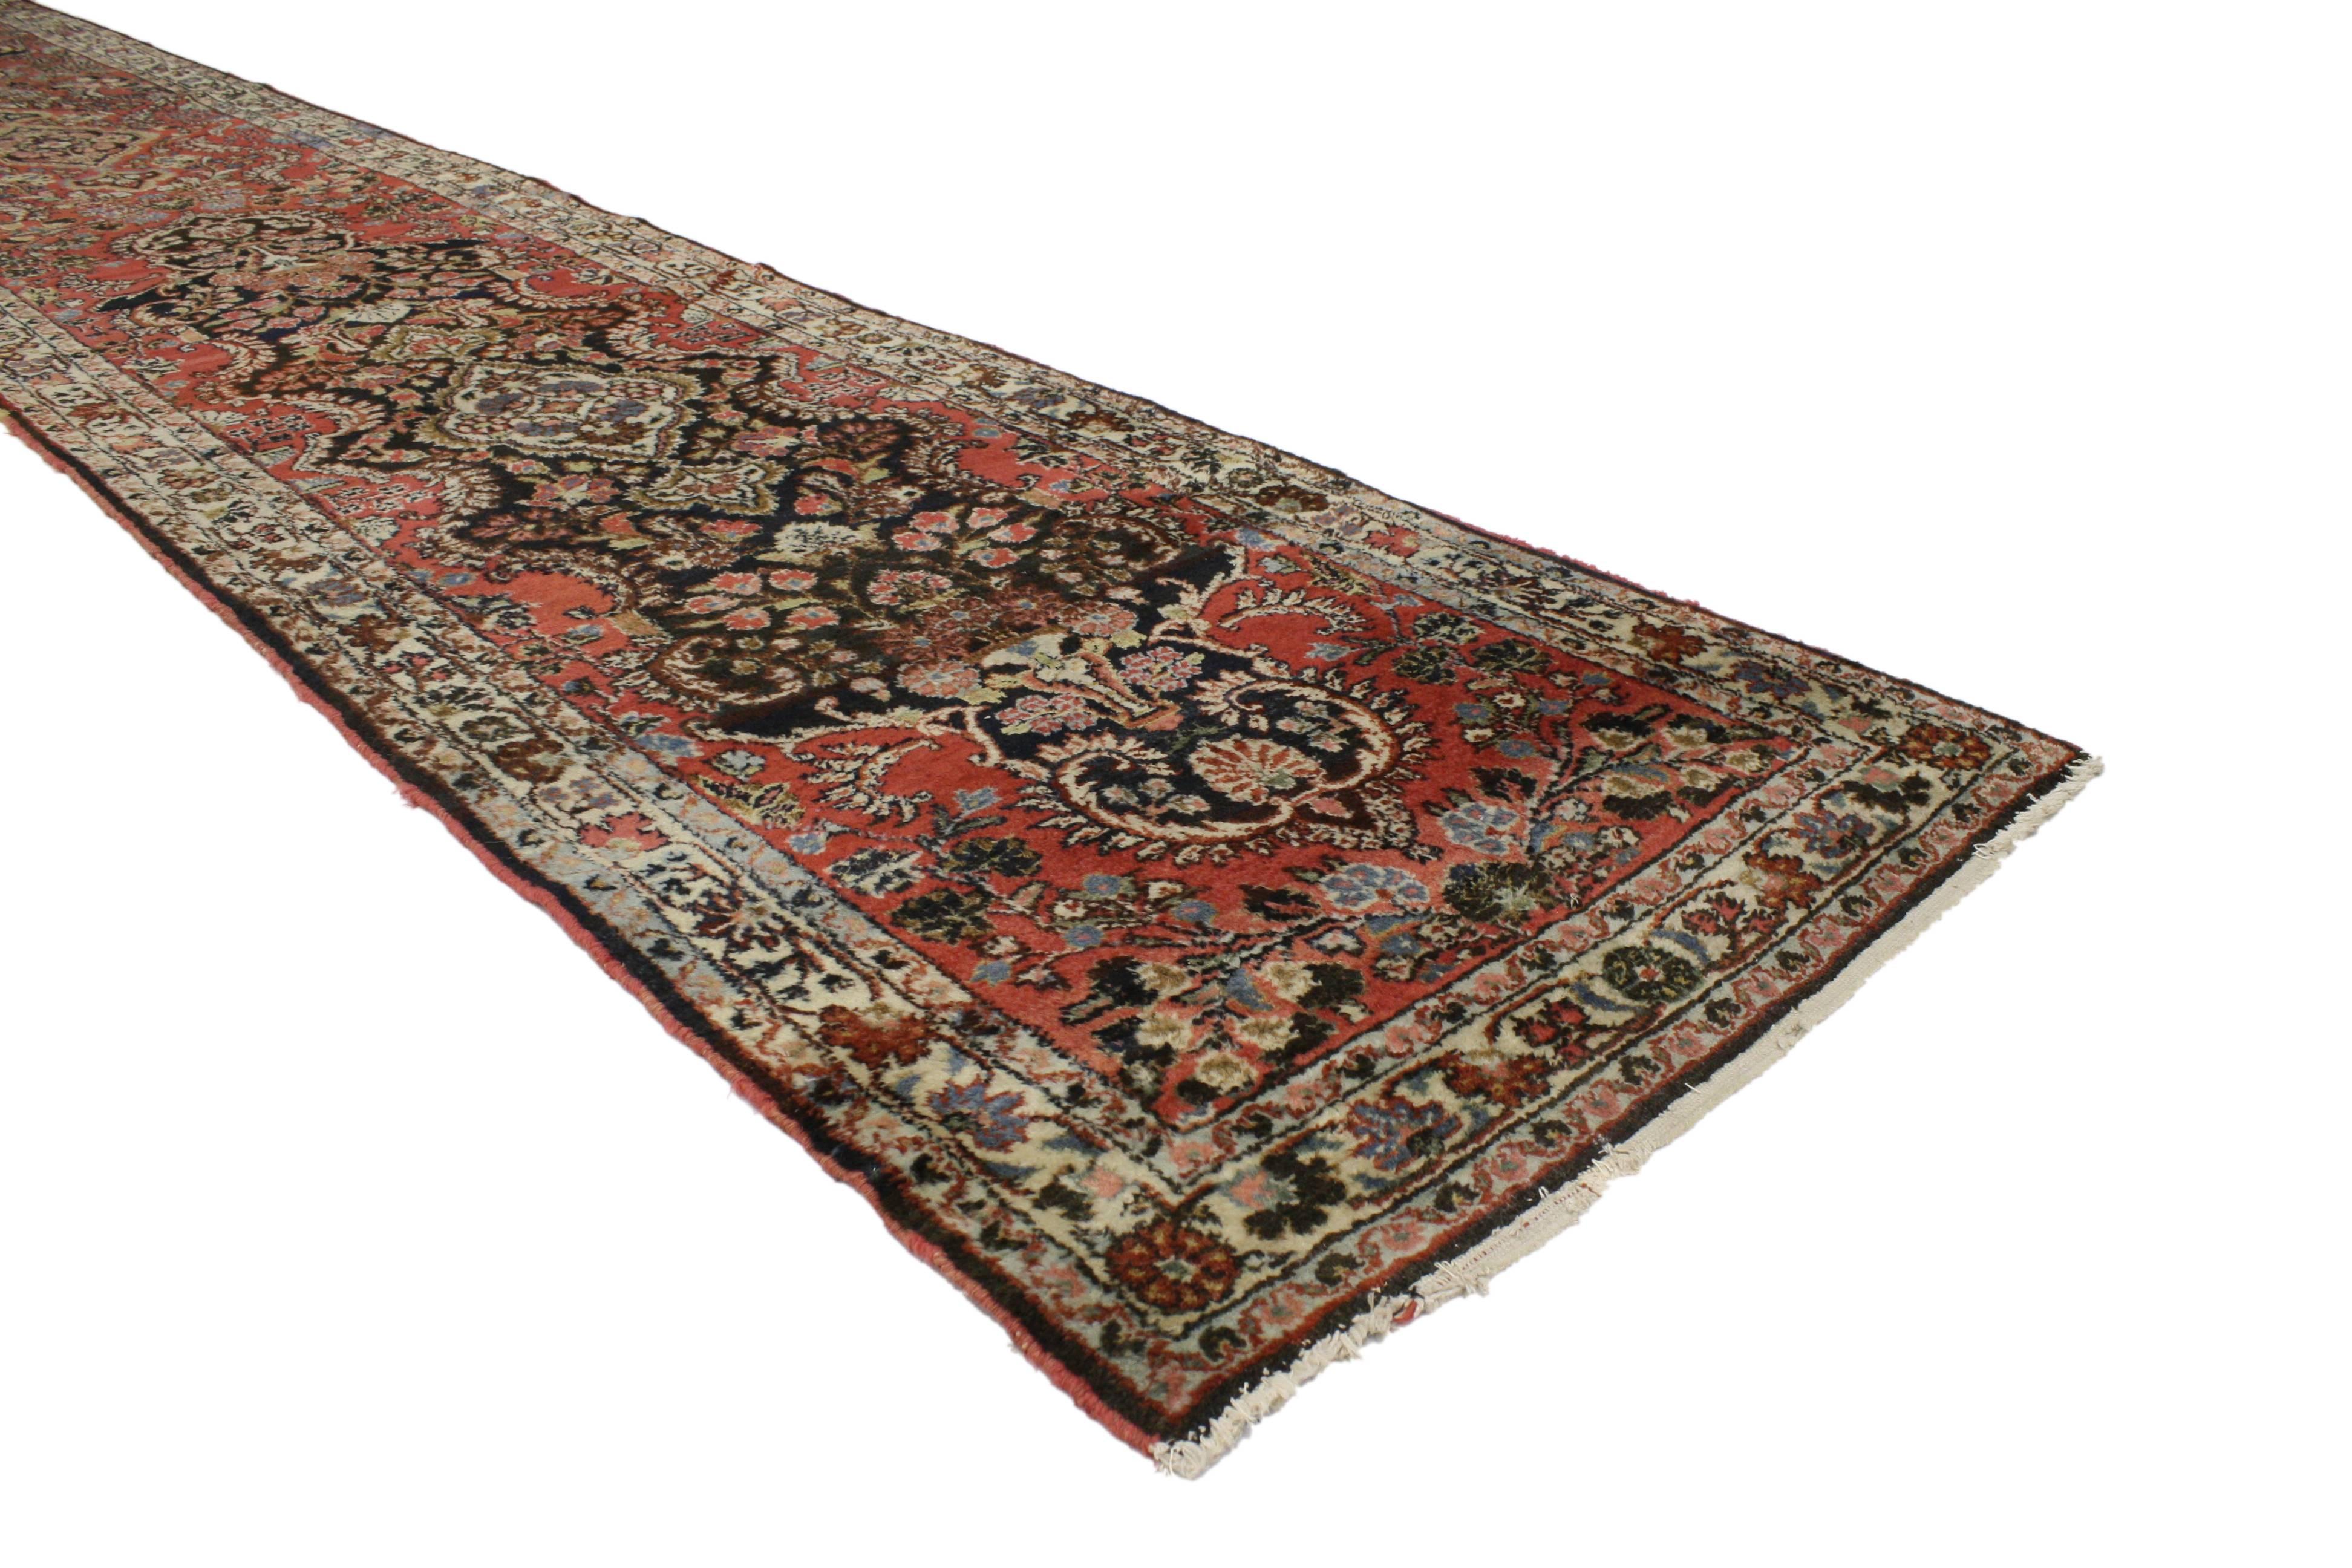 Impeccably woven combined with its bold elemental nature, antique Persian Hamadan extra long carpet runner embodies traditional style. Two black cartouche style medallions are placed in a red field surrounded by florals. The meticulously